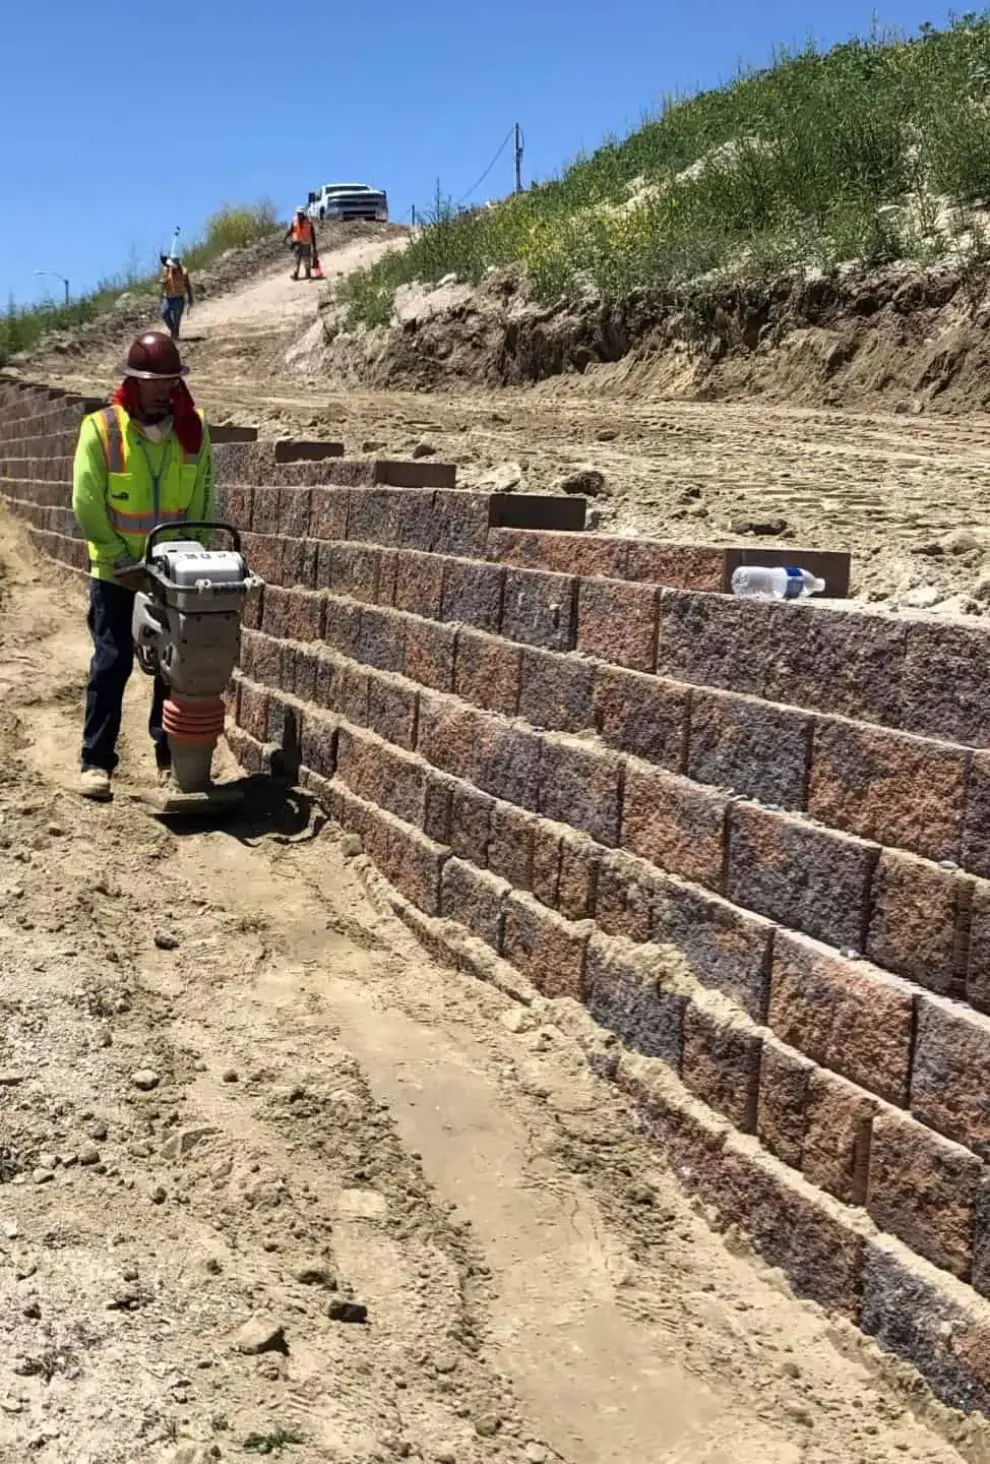 Belgard® Diamond Pro Segmental Wall Systems Address Geological, Aesthetic Concerns in Creating Nearly 100 Buildable Acres for Prime Housing in California